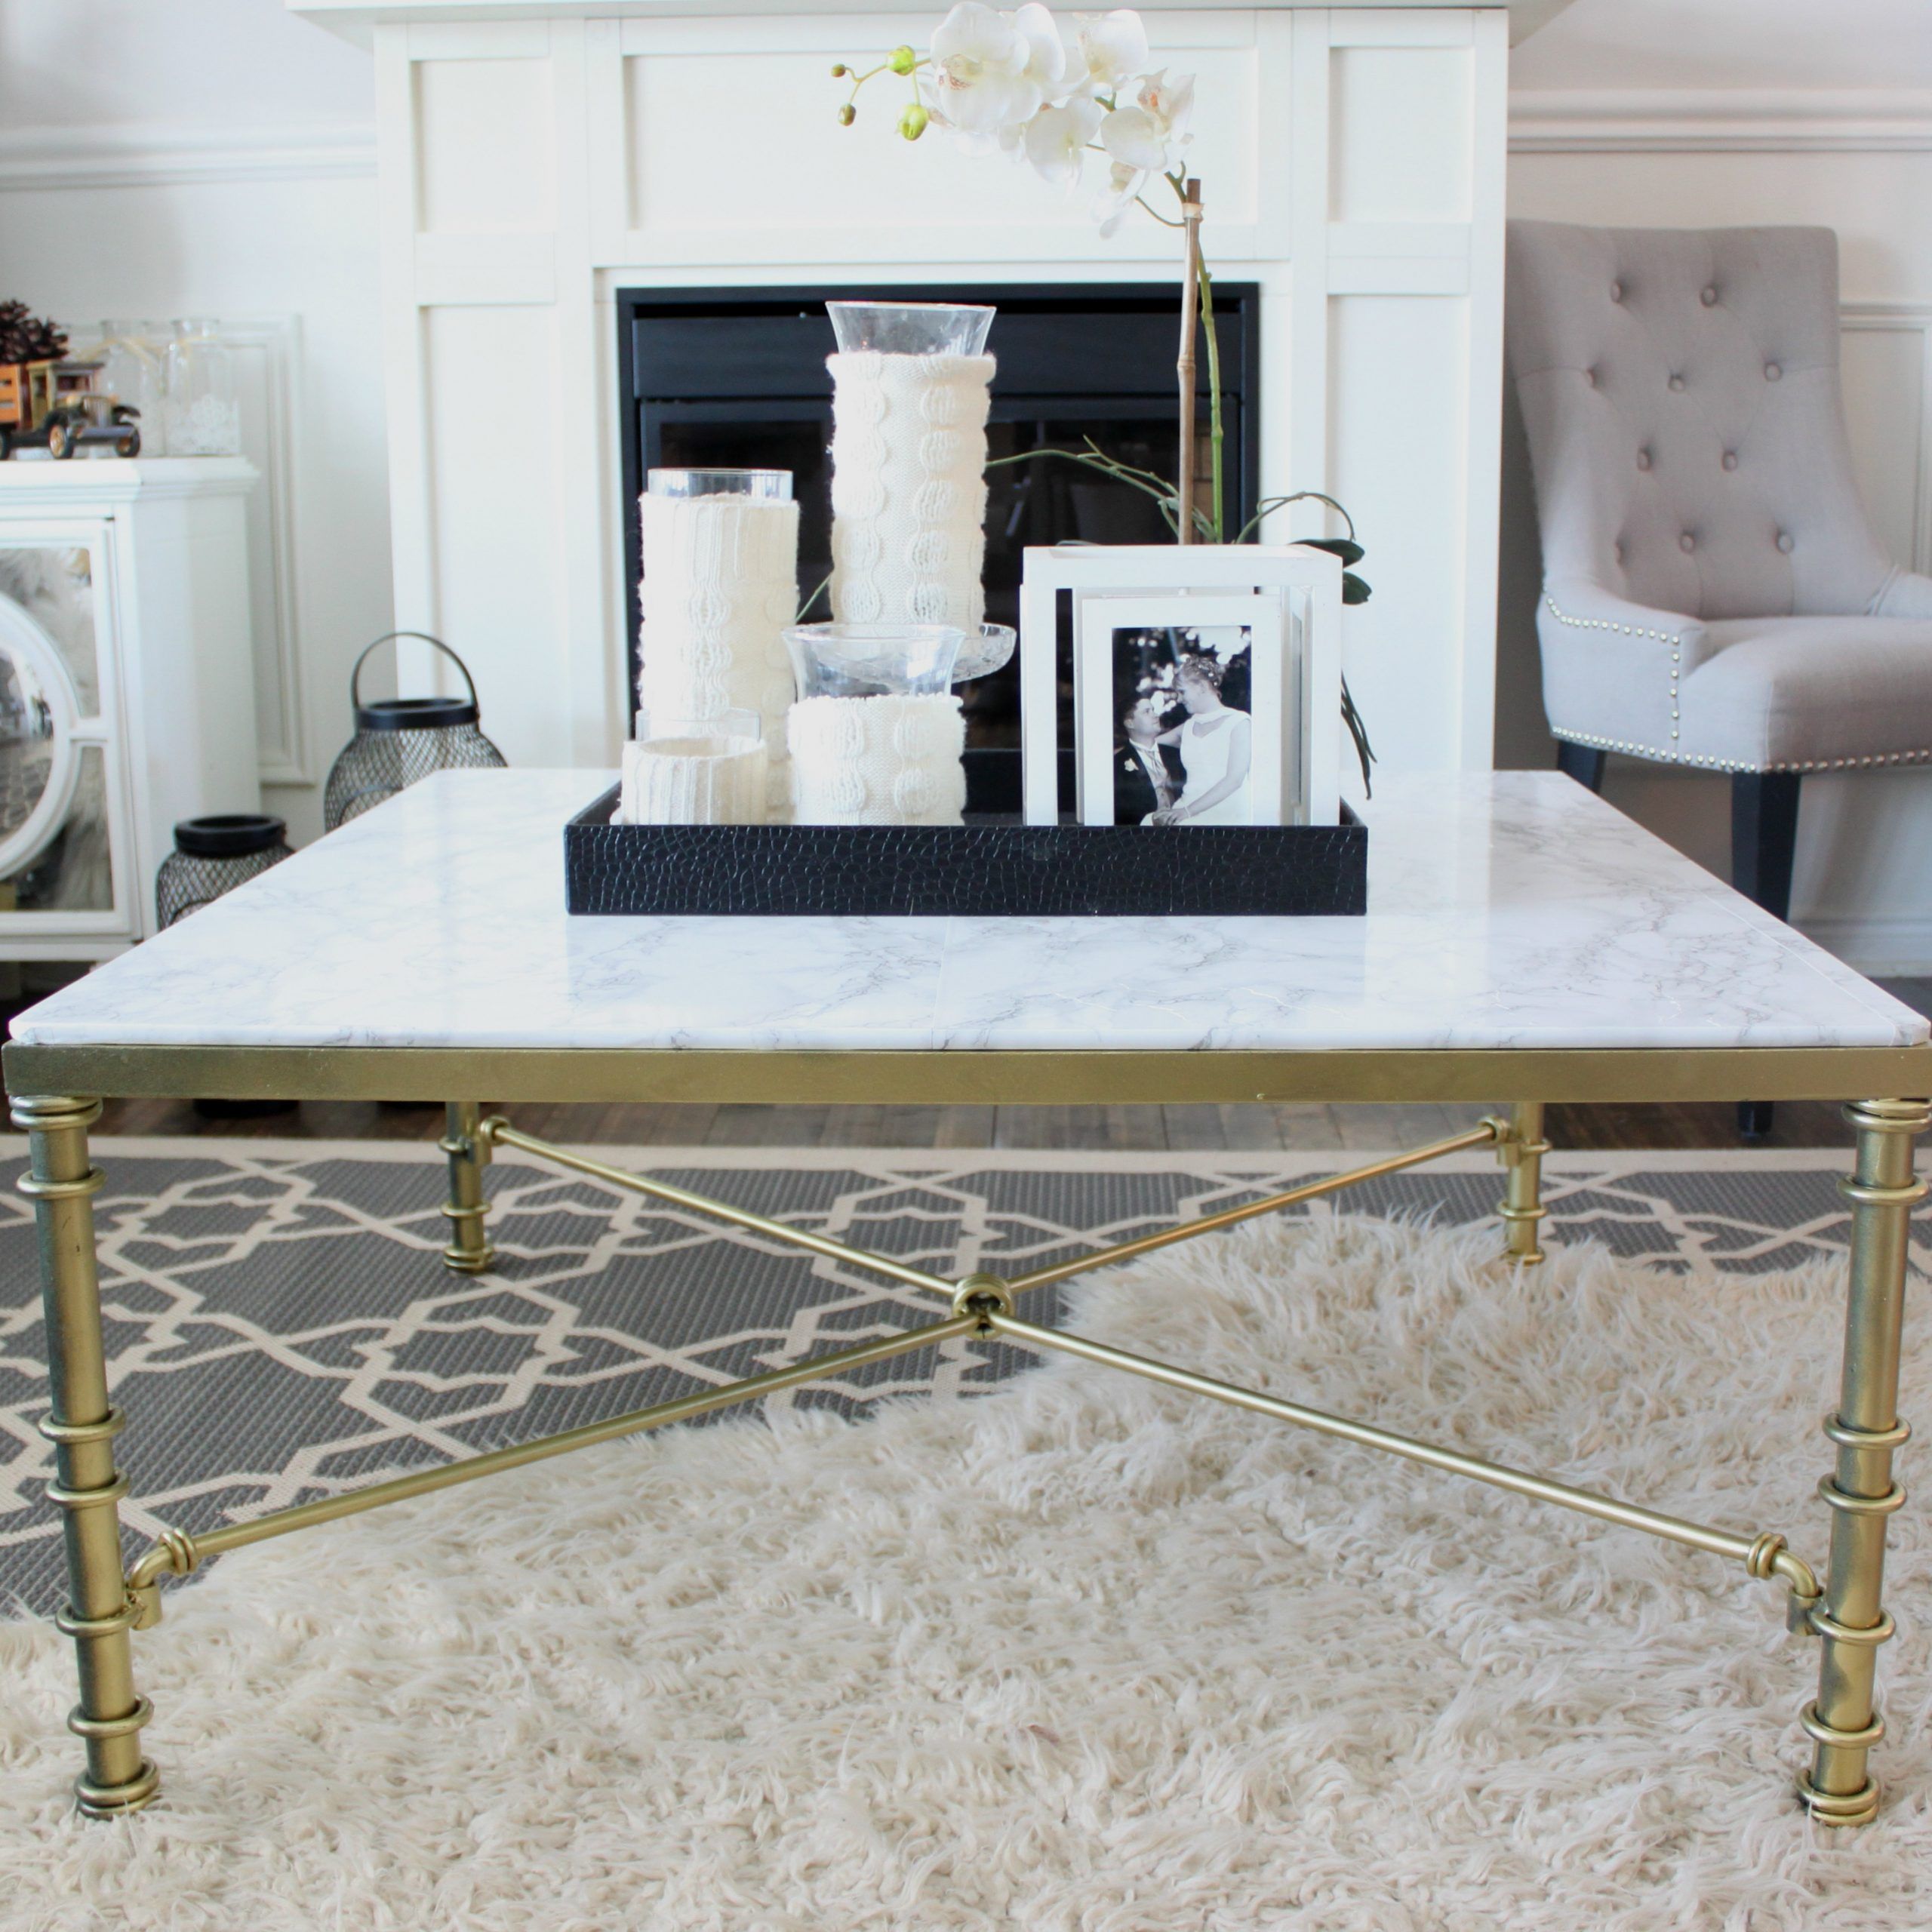 2019 Faux Marble Coffee Tables With Regard To Diy Faux Marble Coffee Table – A Purdy Little House (View 6 of 10)